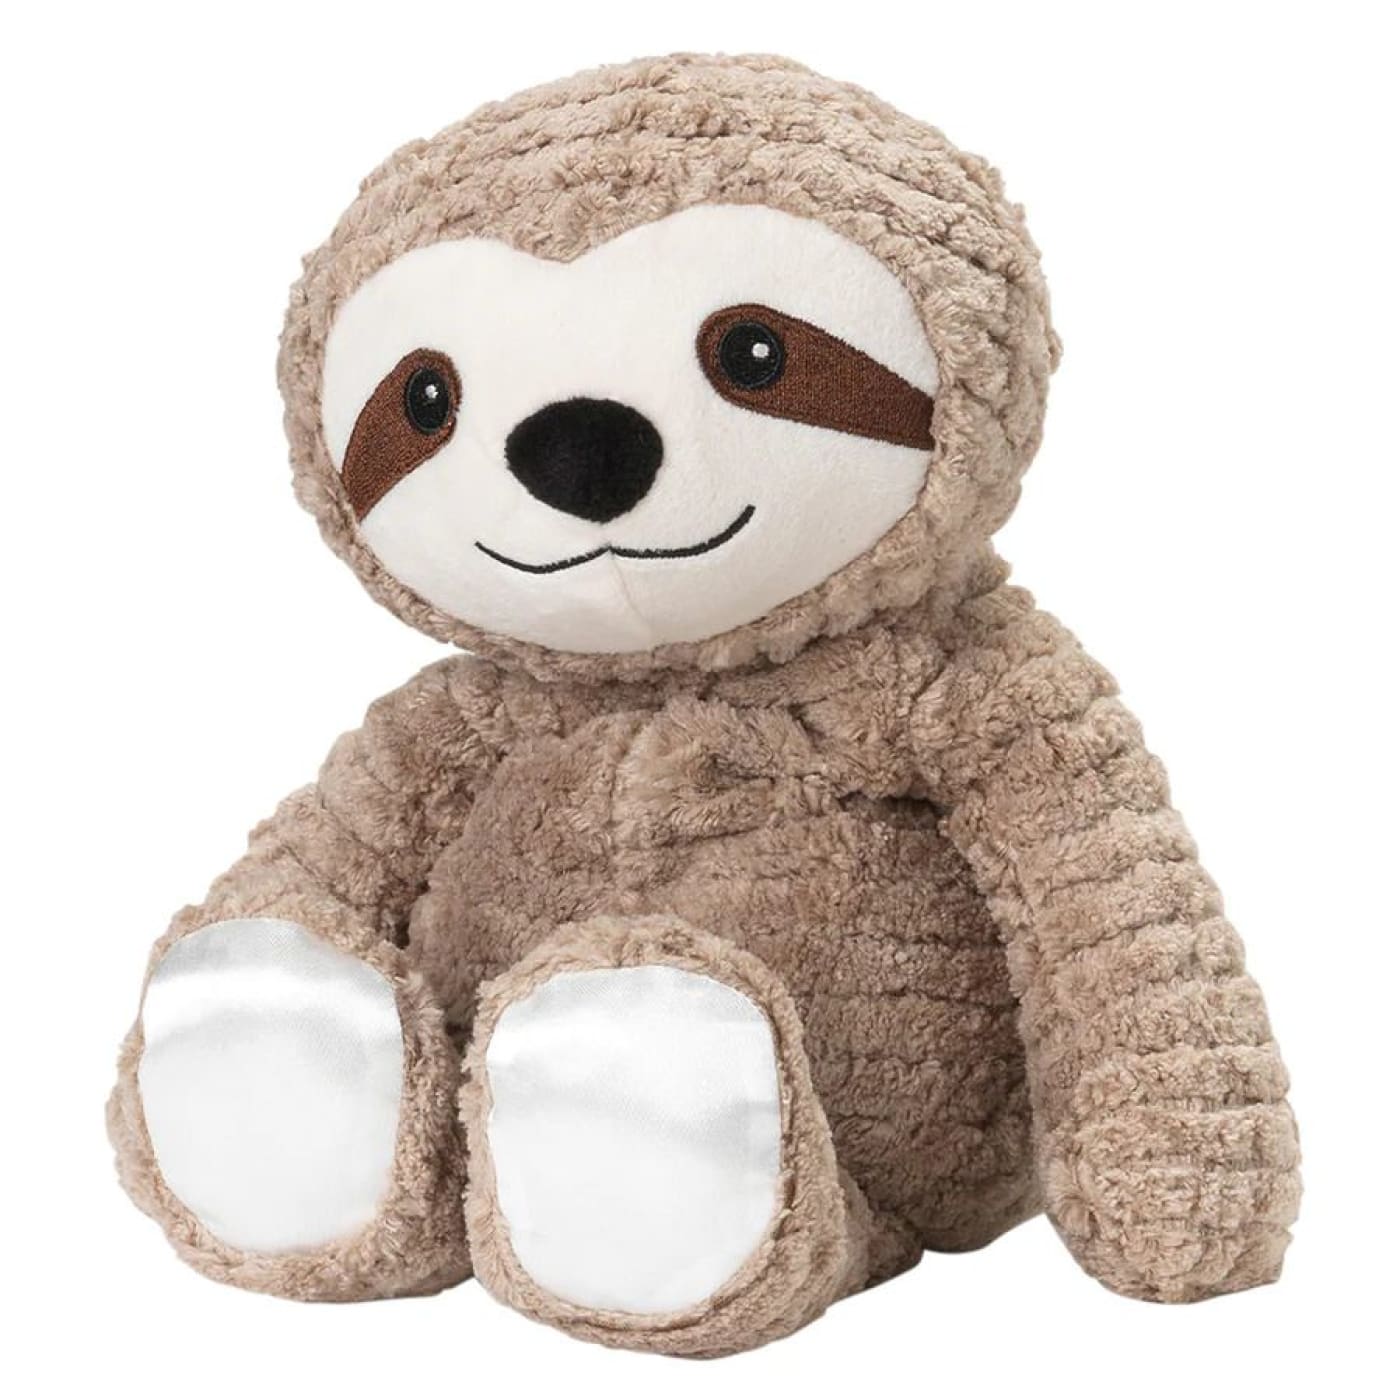 Warmies My First Heatable Soft Toy Scented with French Lavender - Sloth - Sloth - HEALTH & HOME SAFETY - THERMOMETERS/MEDICINAL